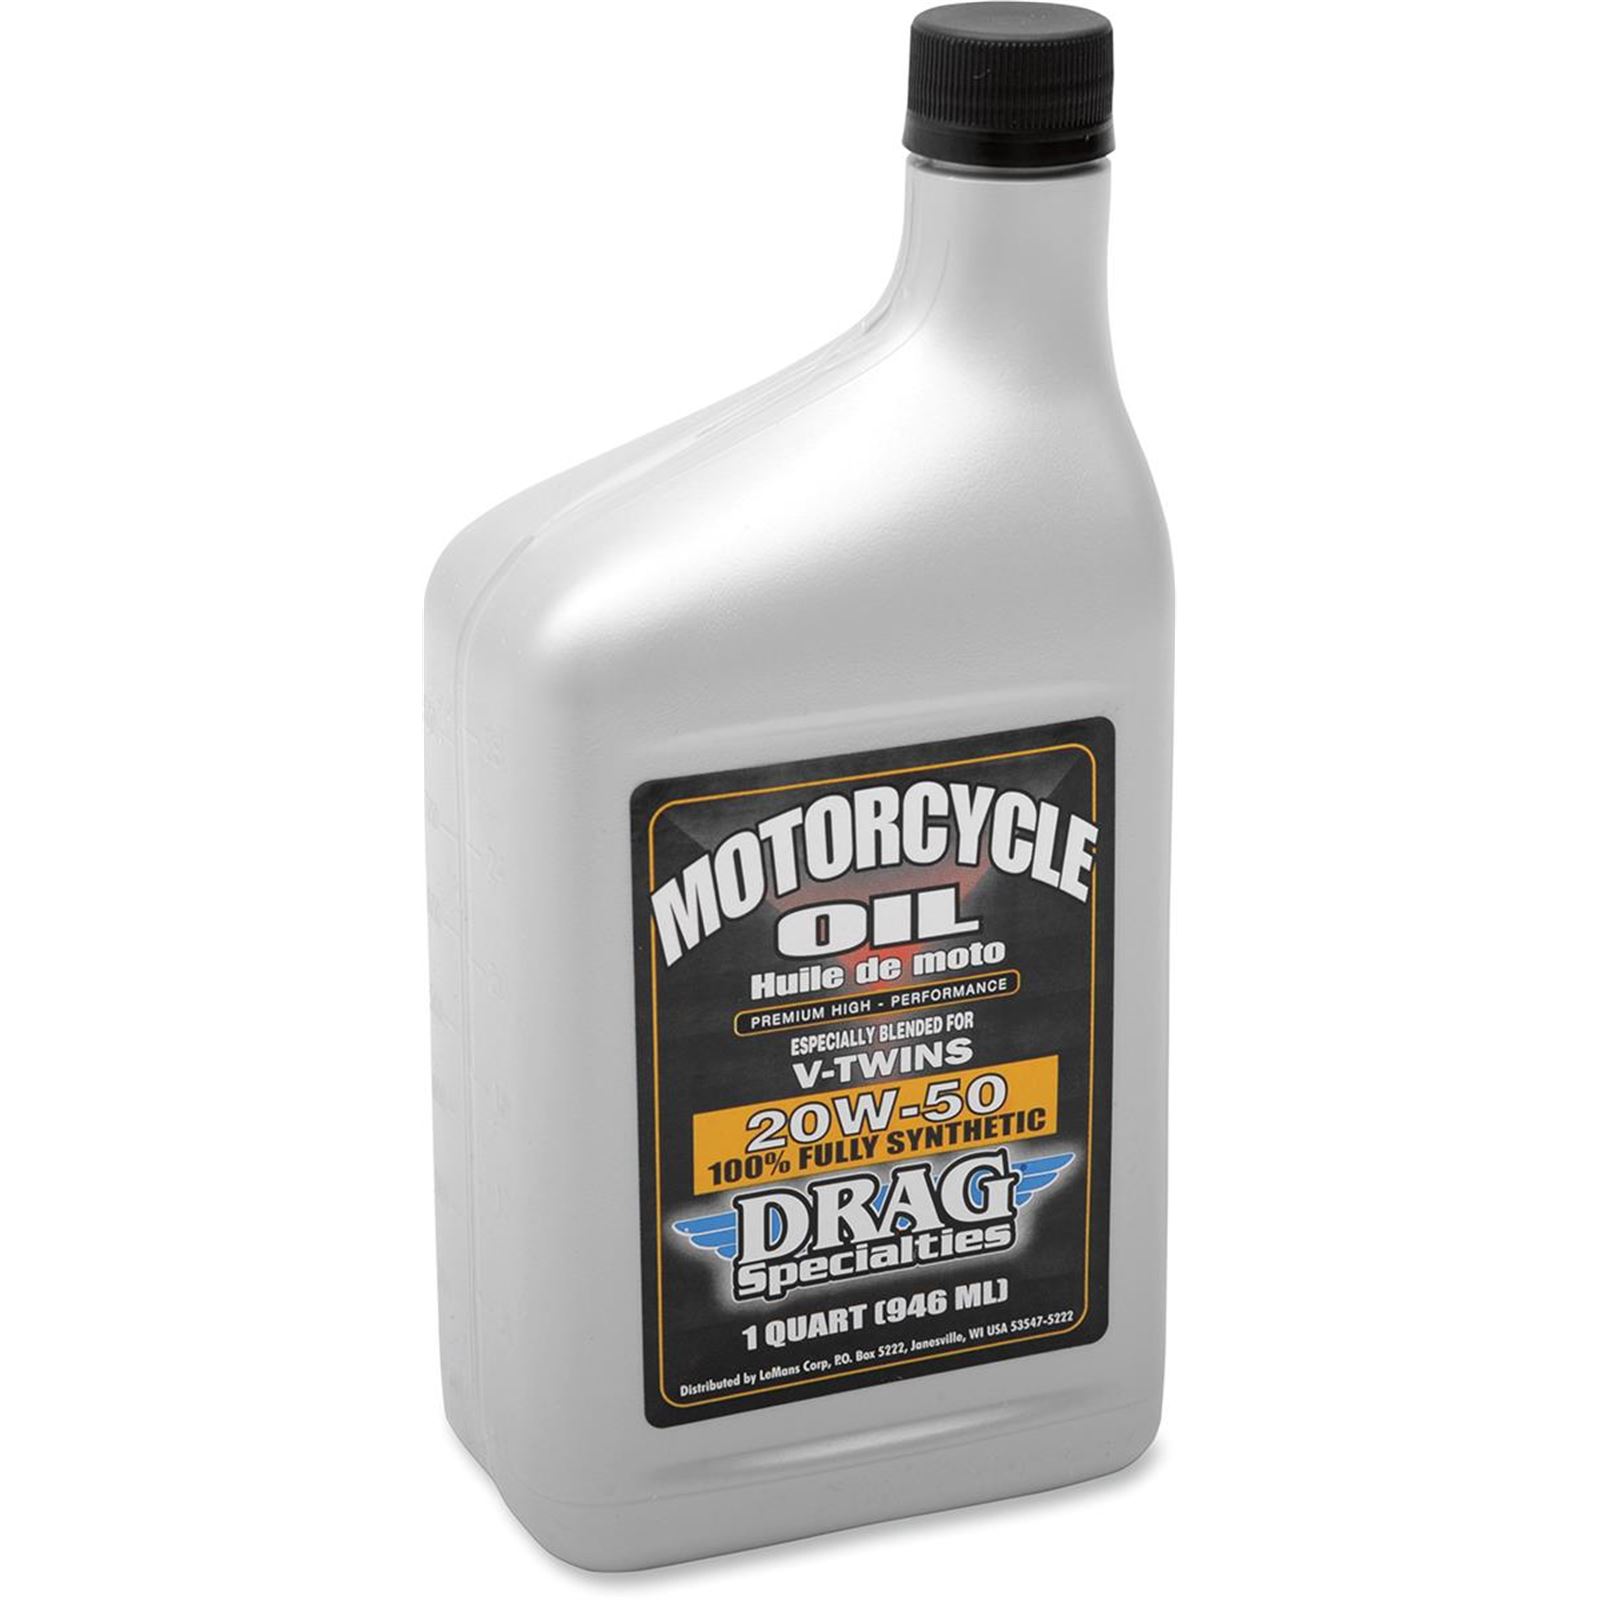 Drag Specialties Synthetic Engine Oil 20W50 - 1 US quart - Case of 12